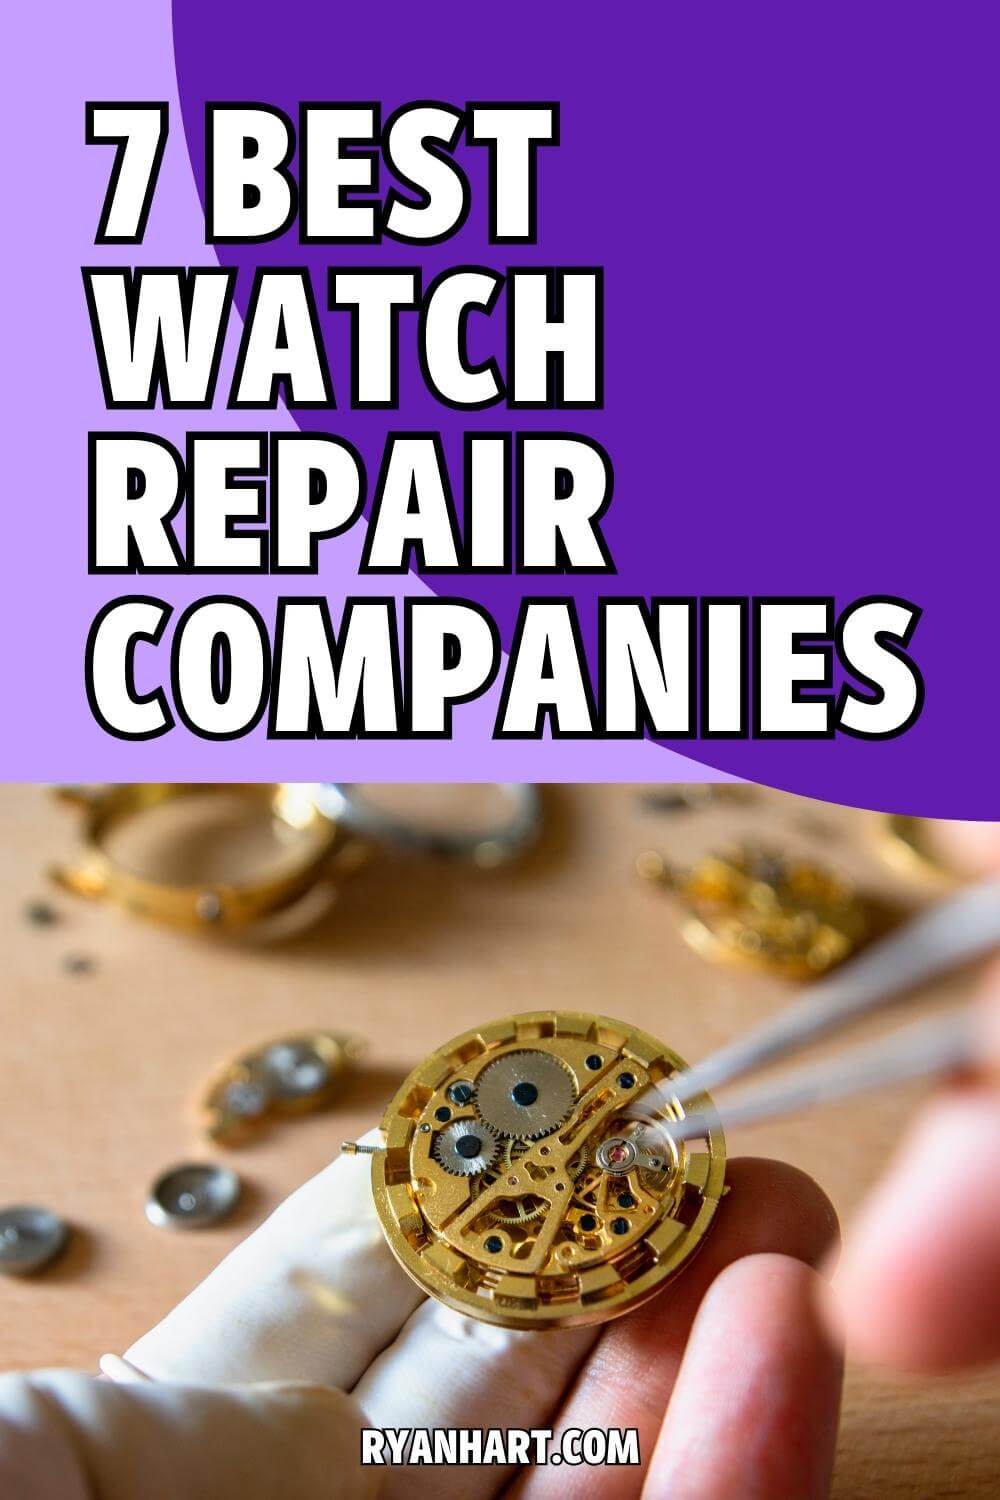 Watch being repaired